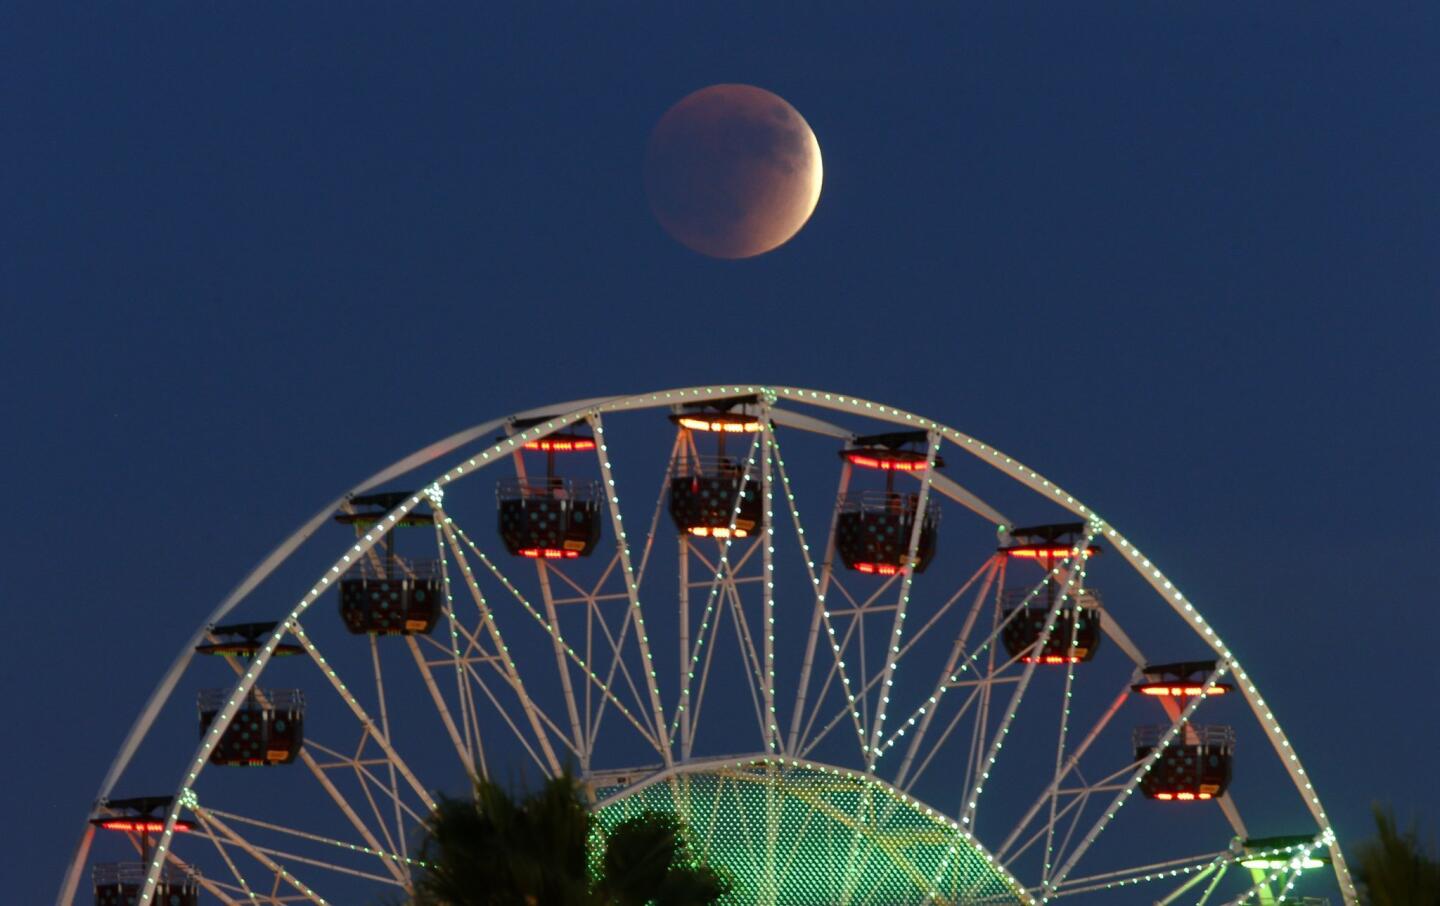 The "super moon" is nearly in total eclipse at 6:07pm September 27, 2015 as it rises behind the Ferris Wheel at the Irvine Spectrum mall in Irvine, CA.